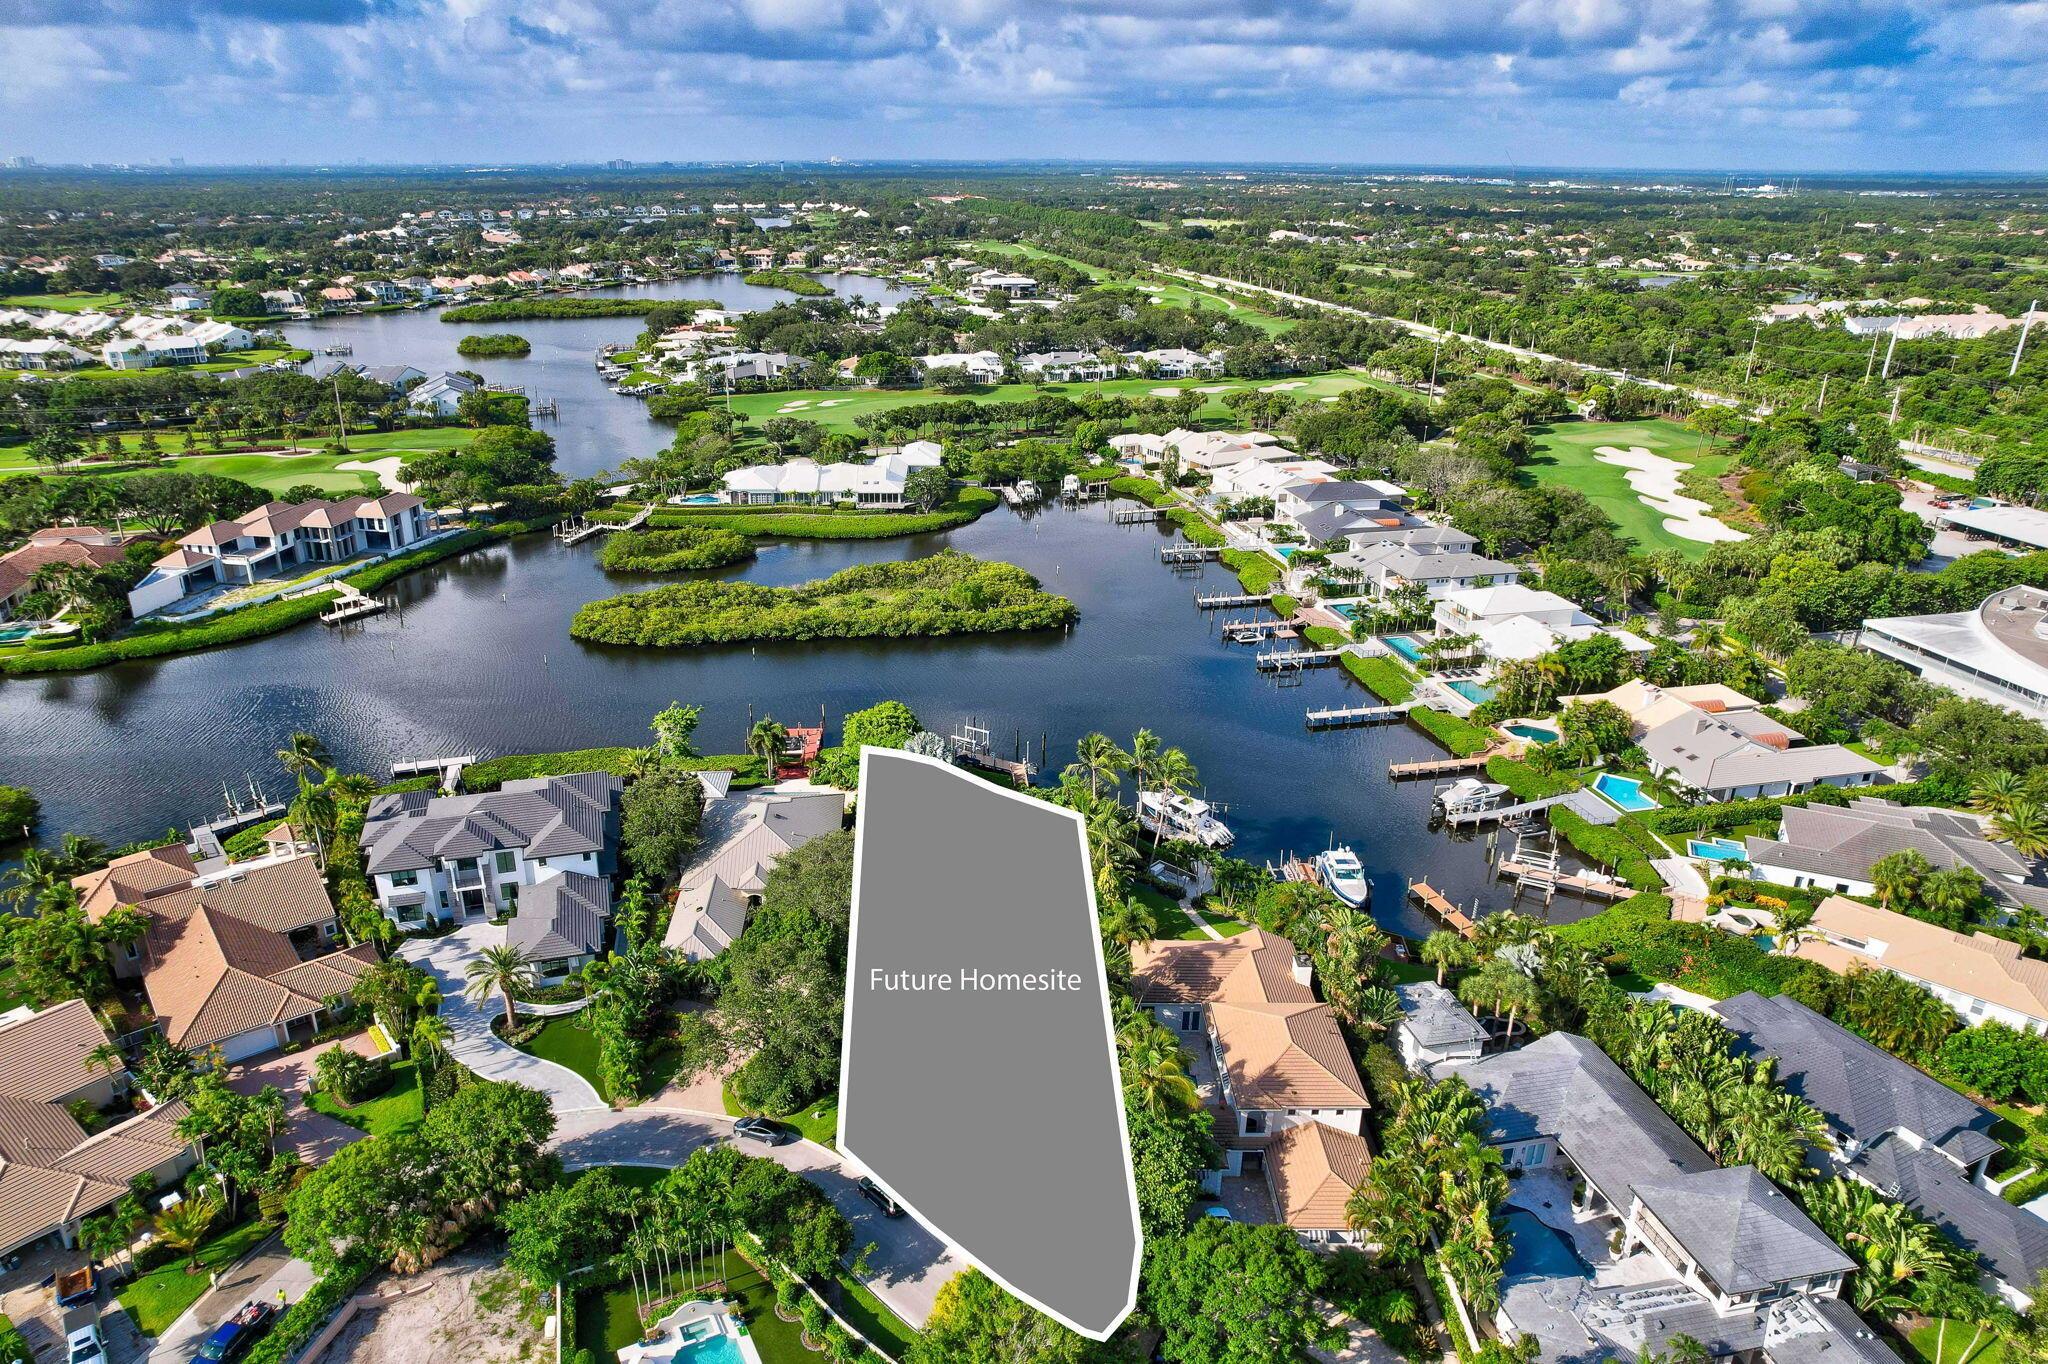 Experience luxury living on an expansive 100+ waterfront lot in the exclusive Admirals Cove.  Enjoy privacy, serene water views and ideal southern exposure.  Build your custom home in a community with top-tier amenities.  Existing home on site.